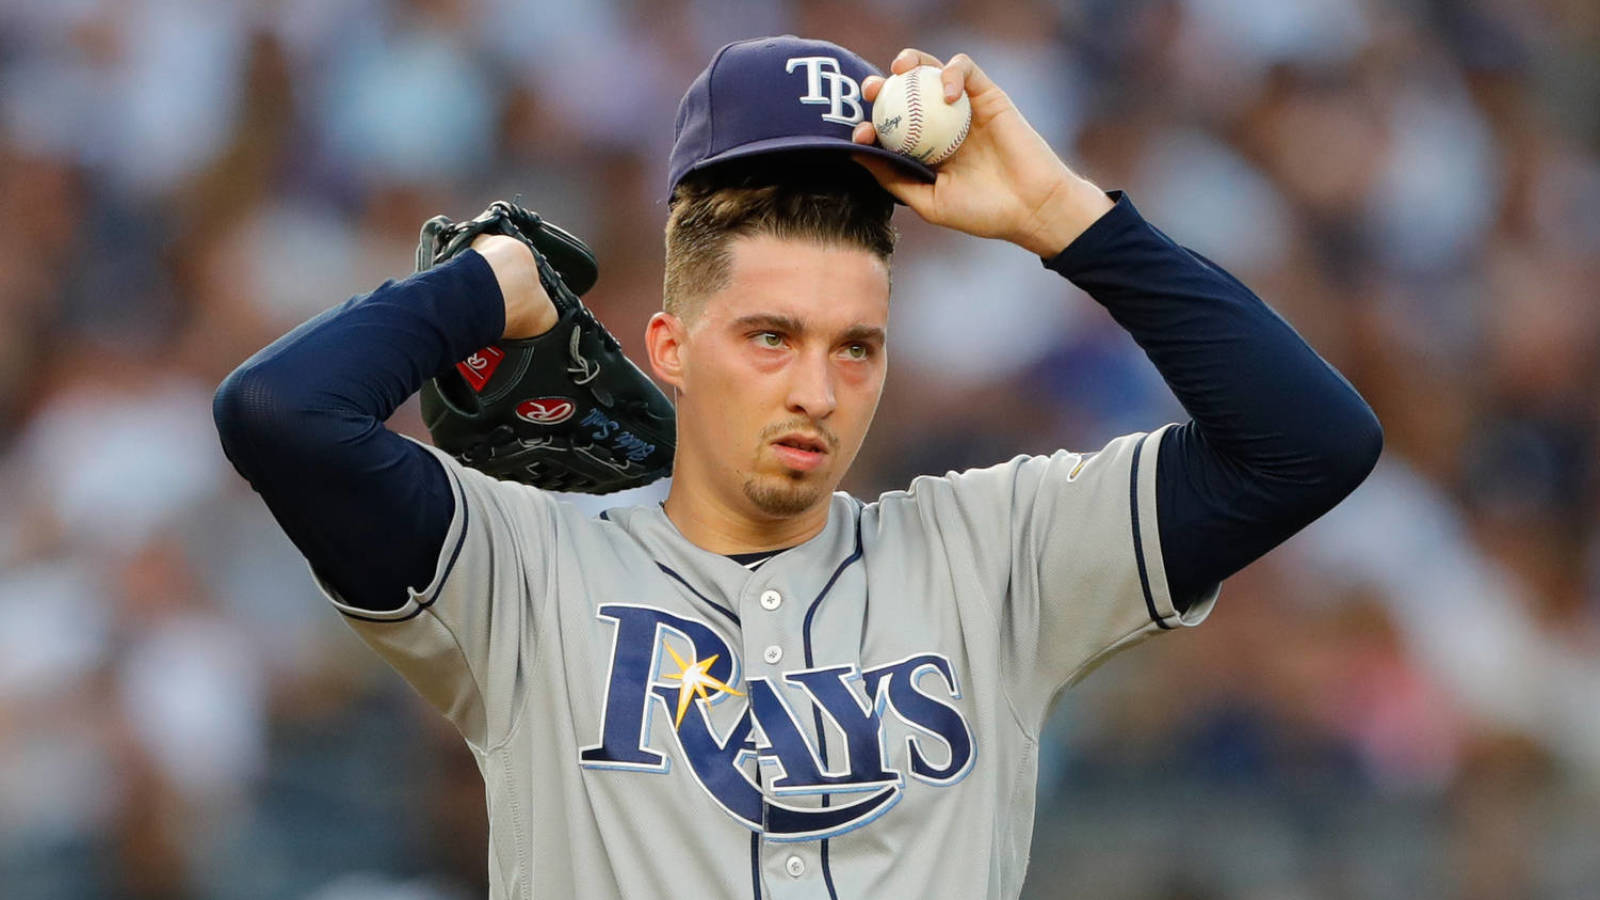 Blake Snell reiterates pay cut comments: Players want 'fair treatment